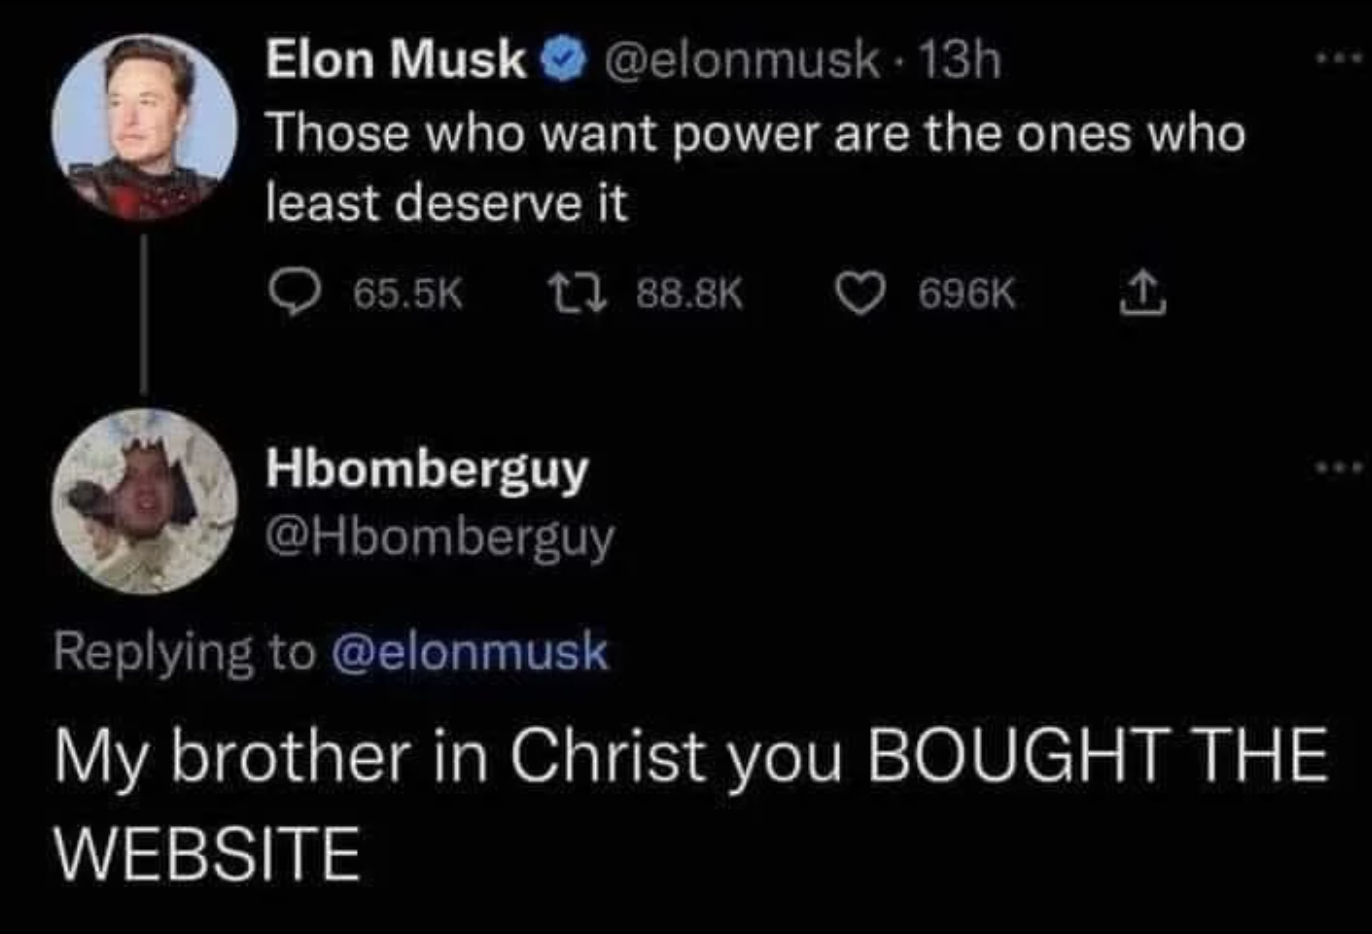 screenshot - Elon Musk . 13h Those who want power are the ones who least deserve it Hbomberguy My brother in Christ you Bought The Website